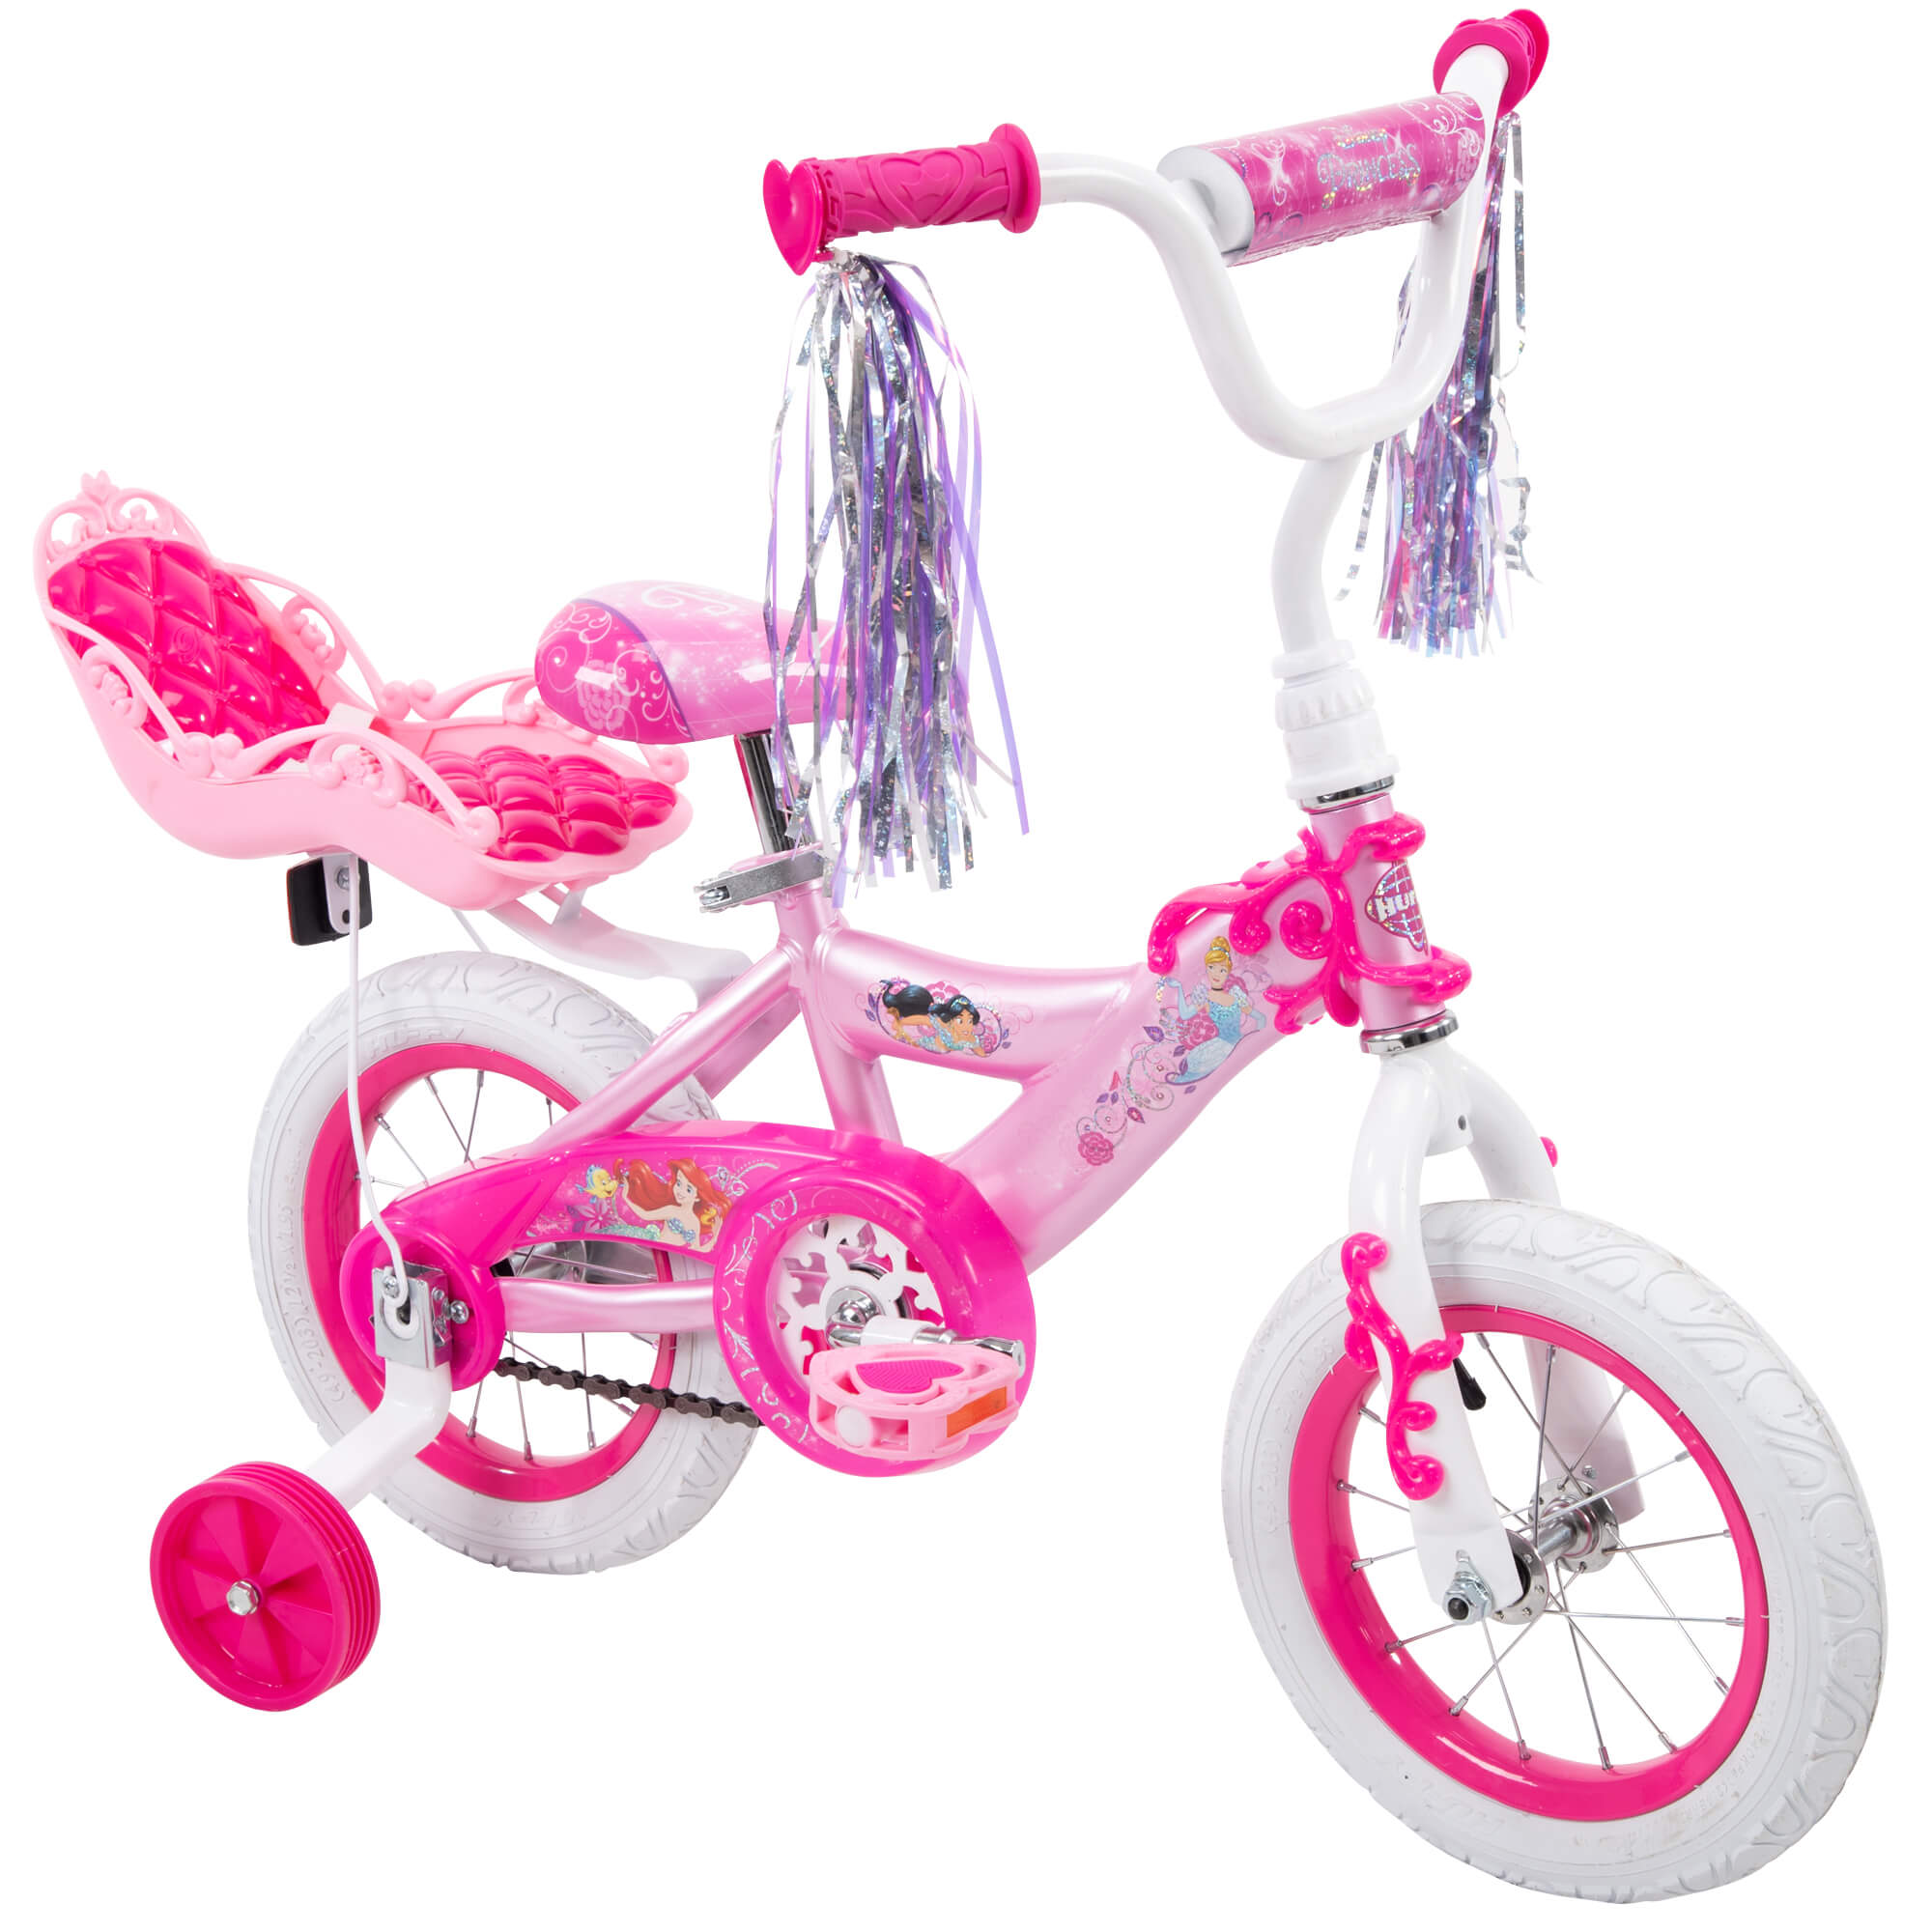 Disney Princess Girls' 12" Bike with Doll Carrier by Huffy - image 1 of 12